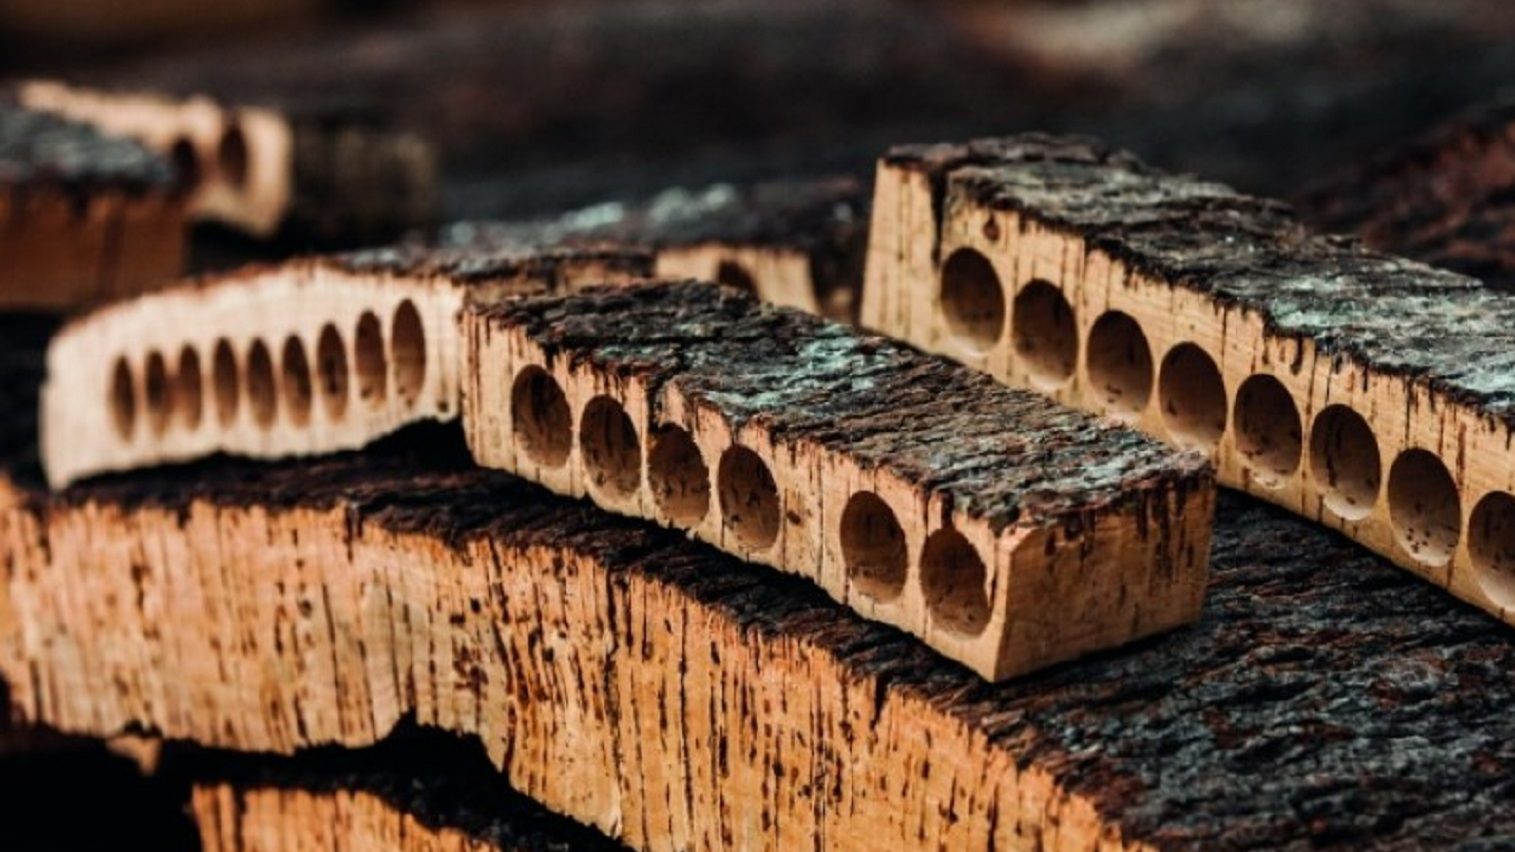 The association said that "the quantity of cork extracted was higher t...